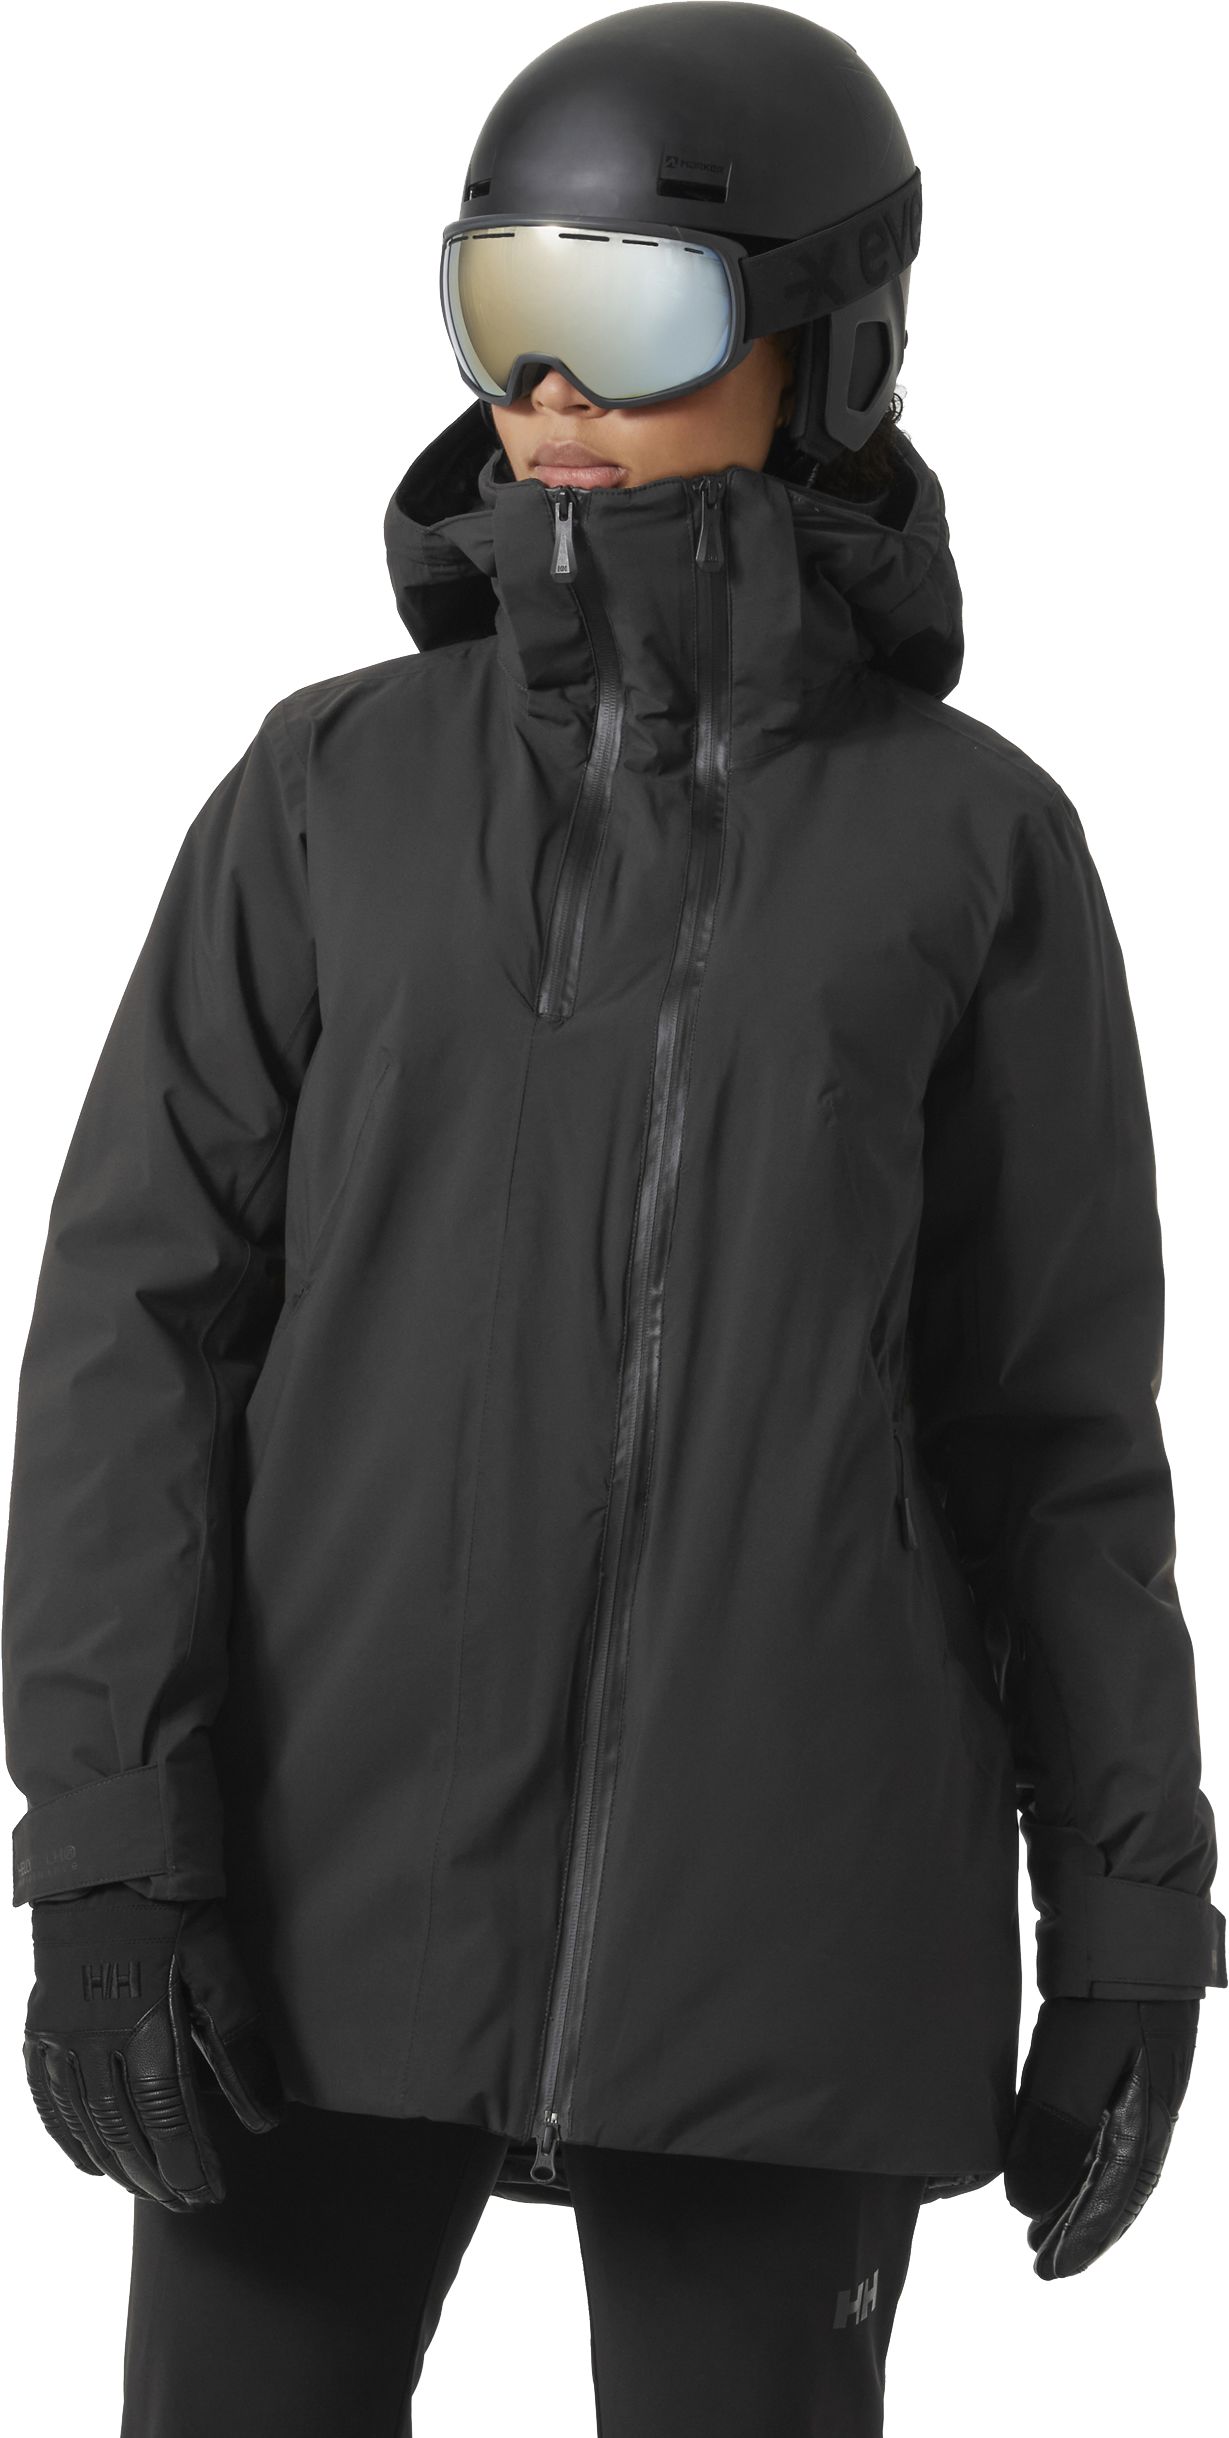 HELLY HANSEN, W NORA LONG INSULATED JACKET